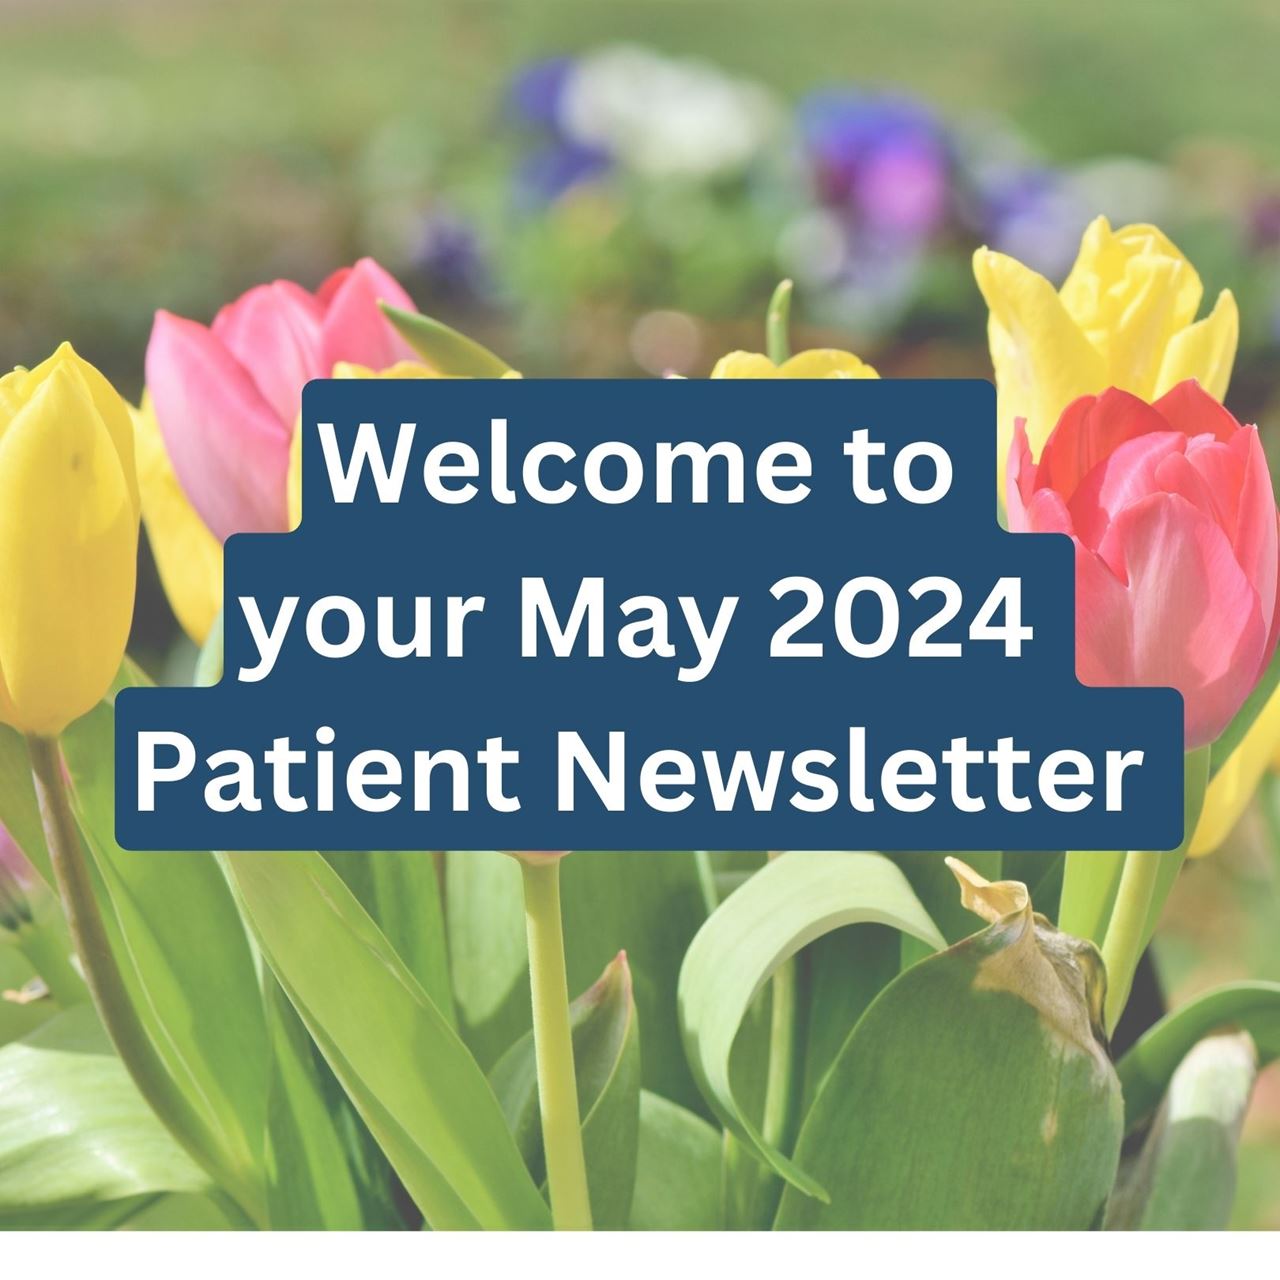 Welcome to your May 2024 Patient Newsletter